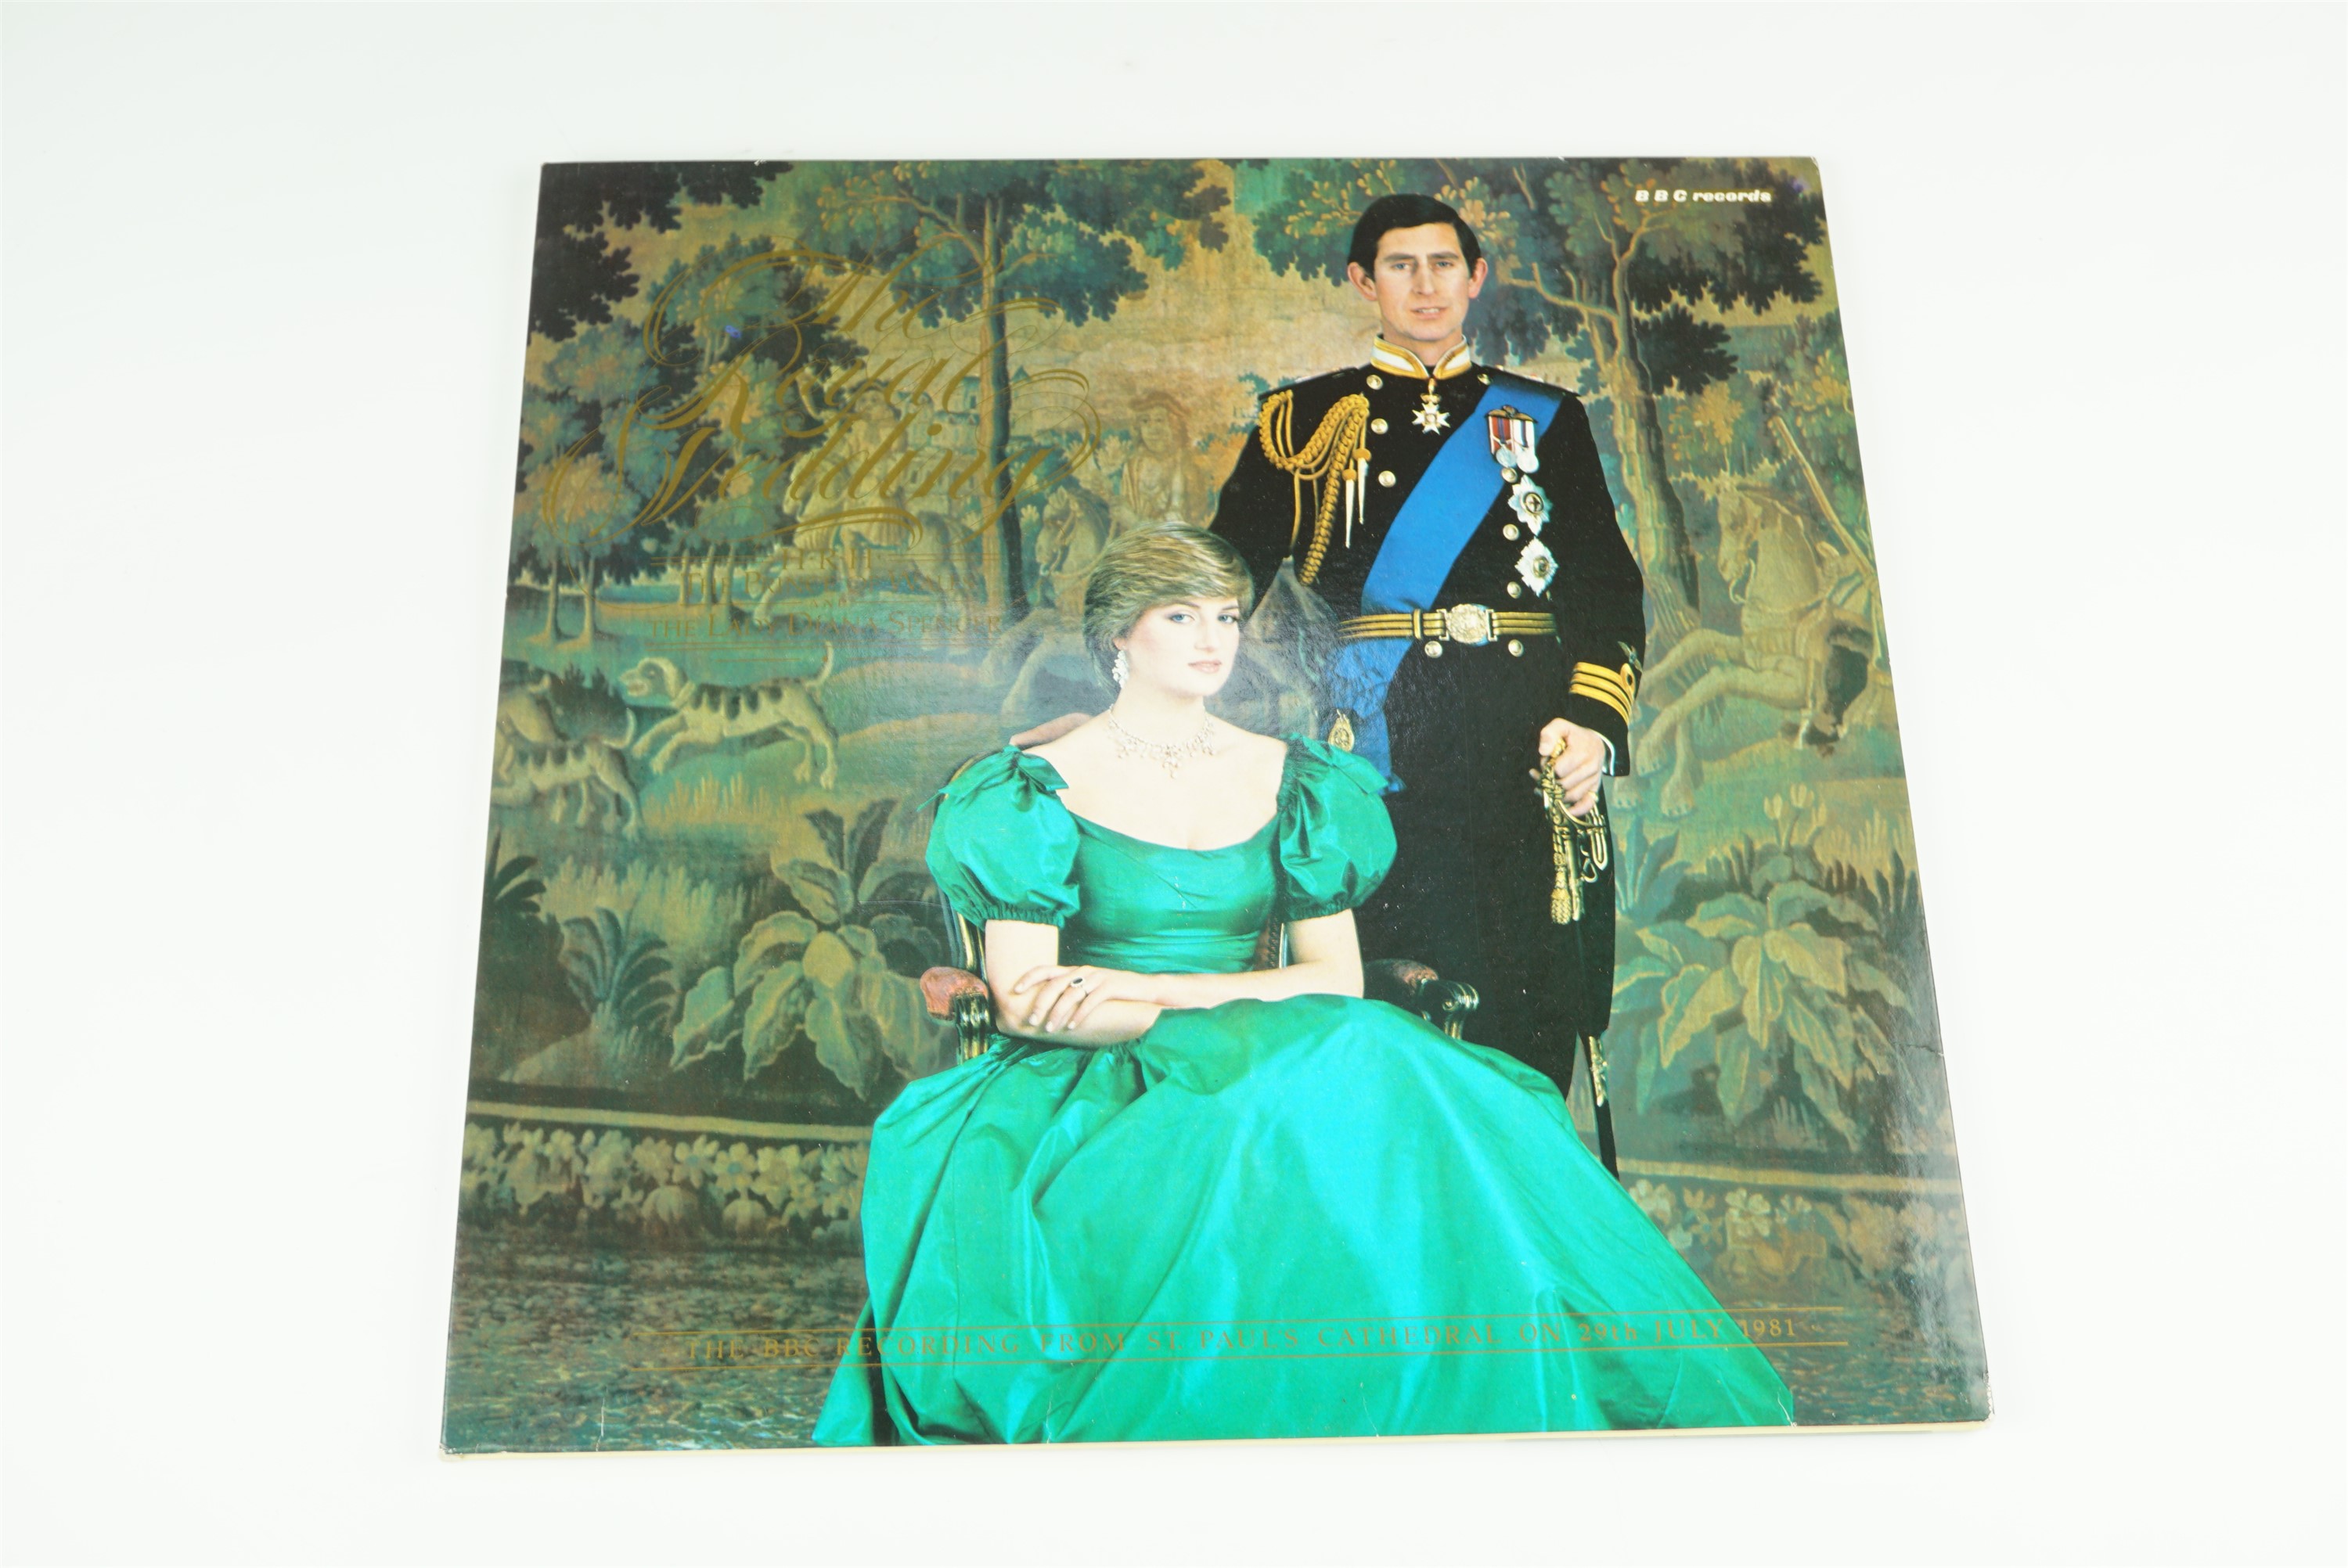 A BBC vinyl record recording of "The Royal Wedding of HRH The Prince of Wales and Lady Diana Spencer